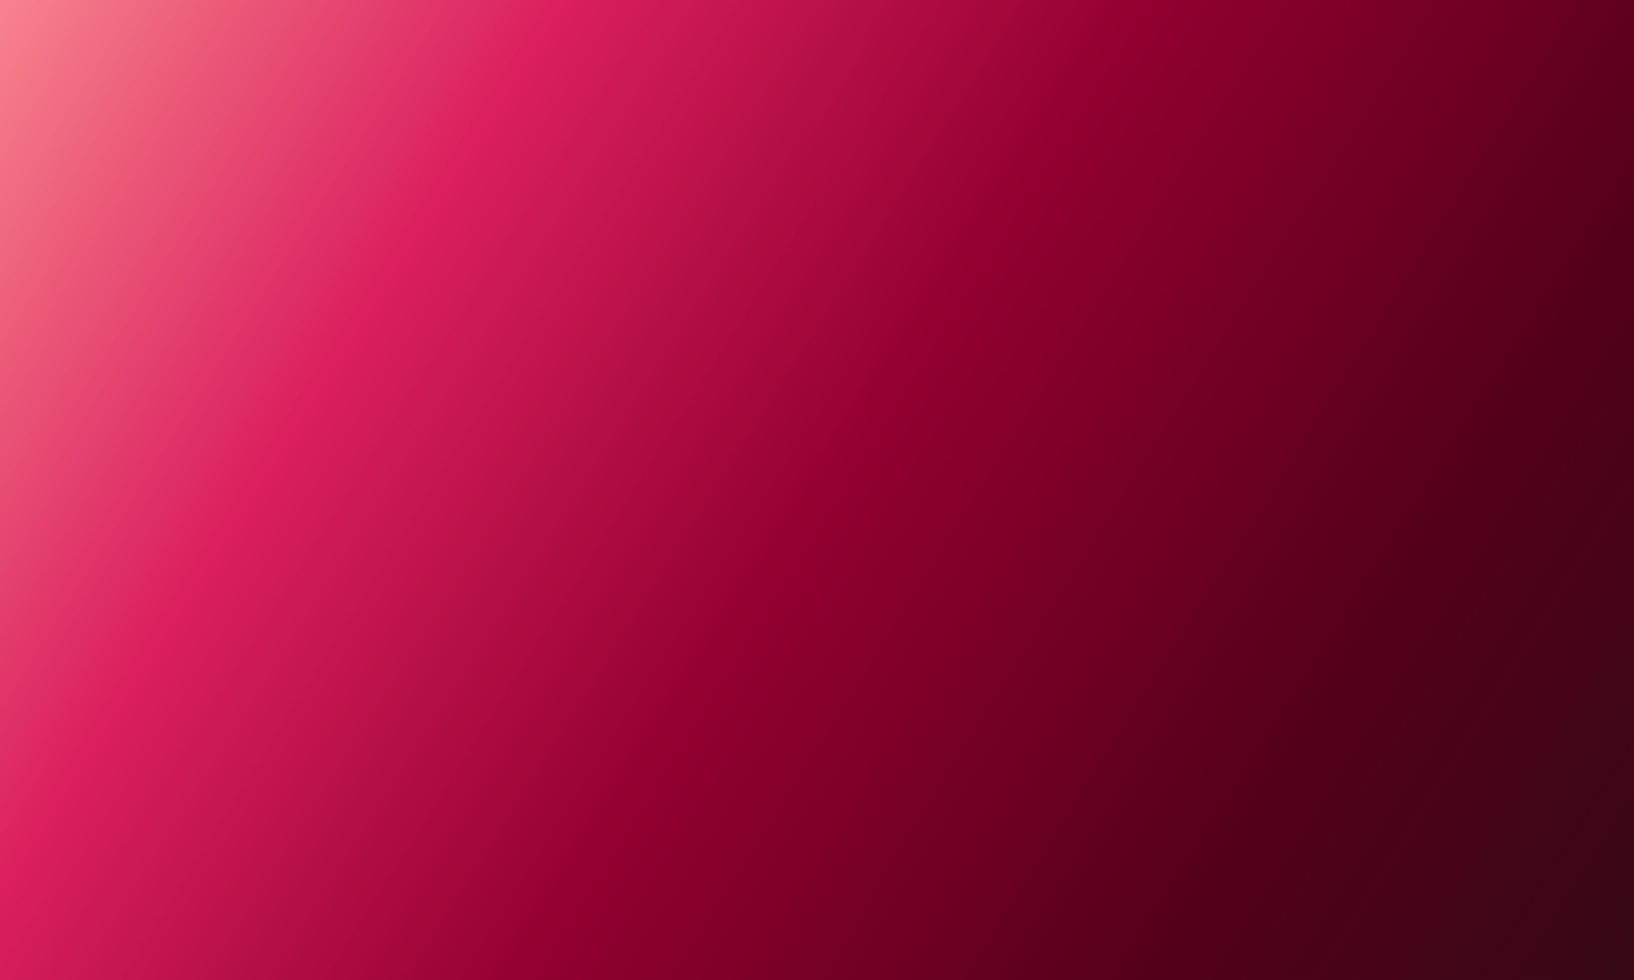 pink and dark red gradient 4519294 Stock Photo